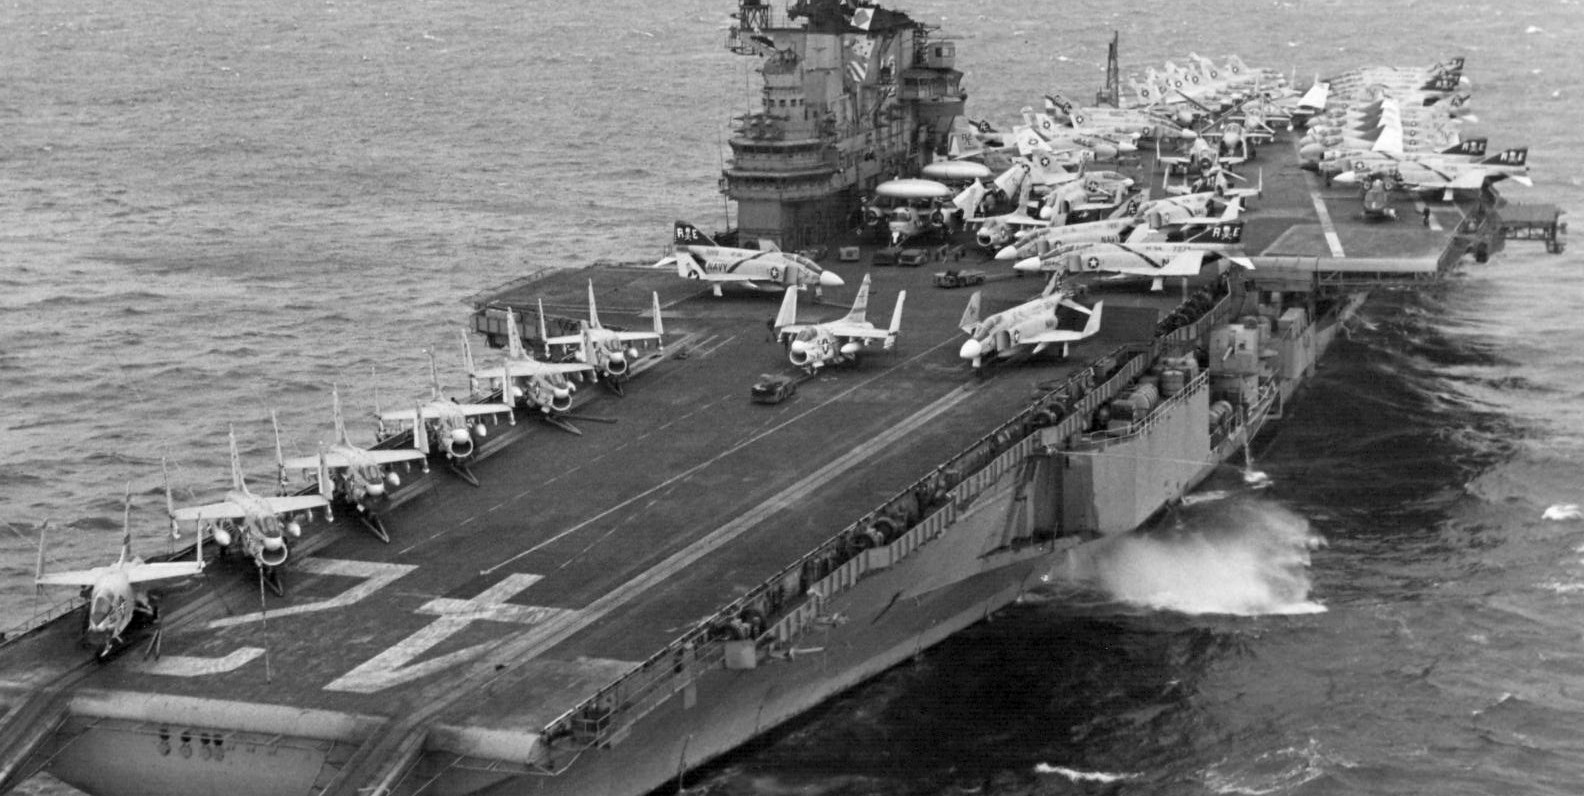 cvw-6 carrier air wing us navy uss franklin d. roosevelt cva-42 embarked squadrons 12